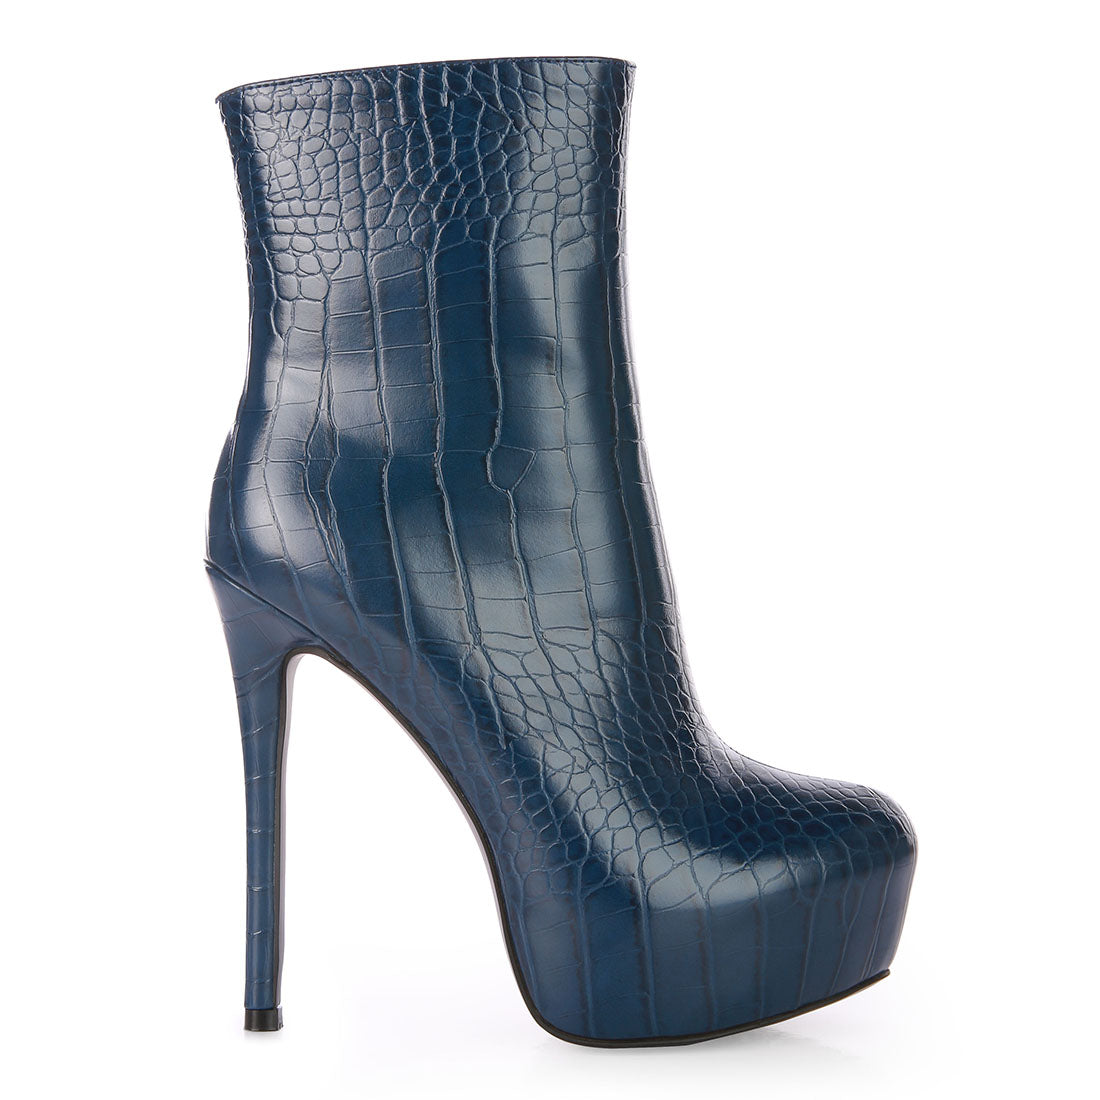 Navy Blue High Heeled Croc Pattern Ankle Boot